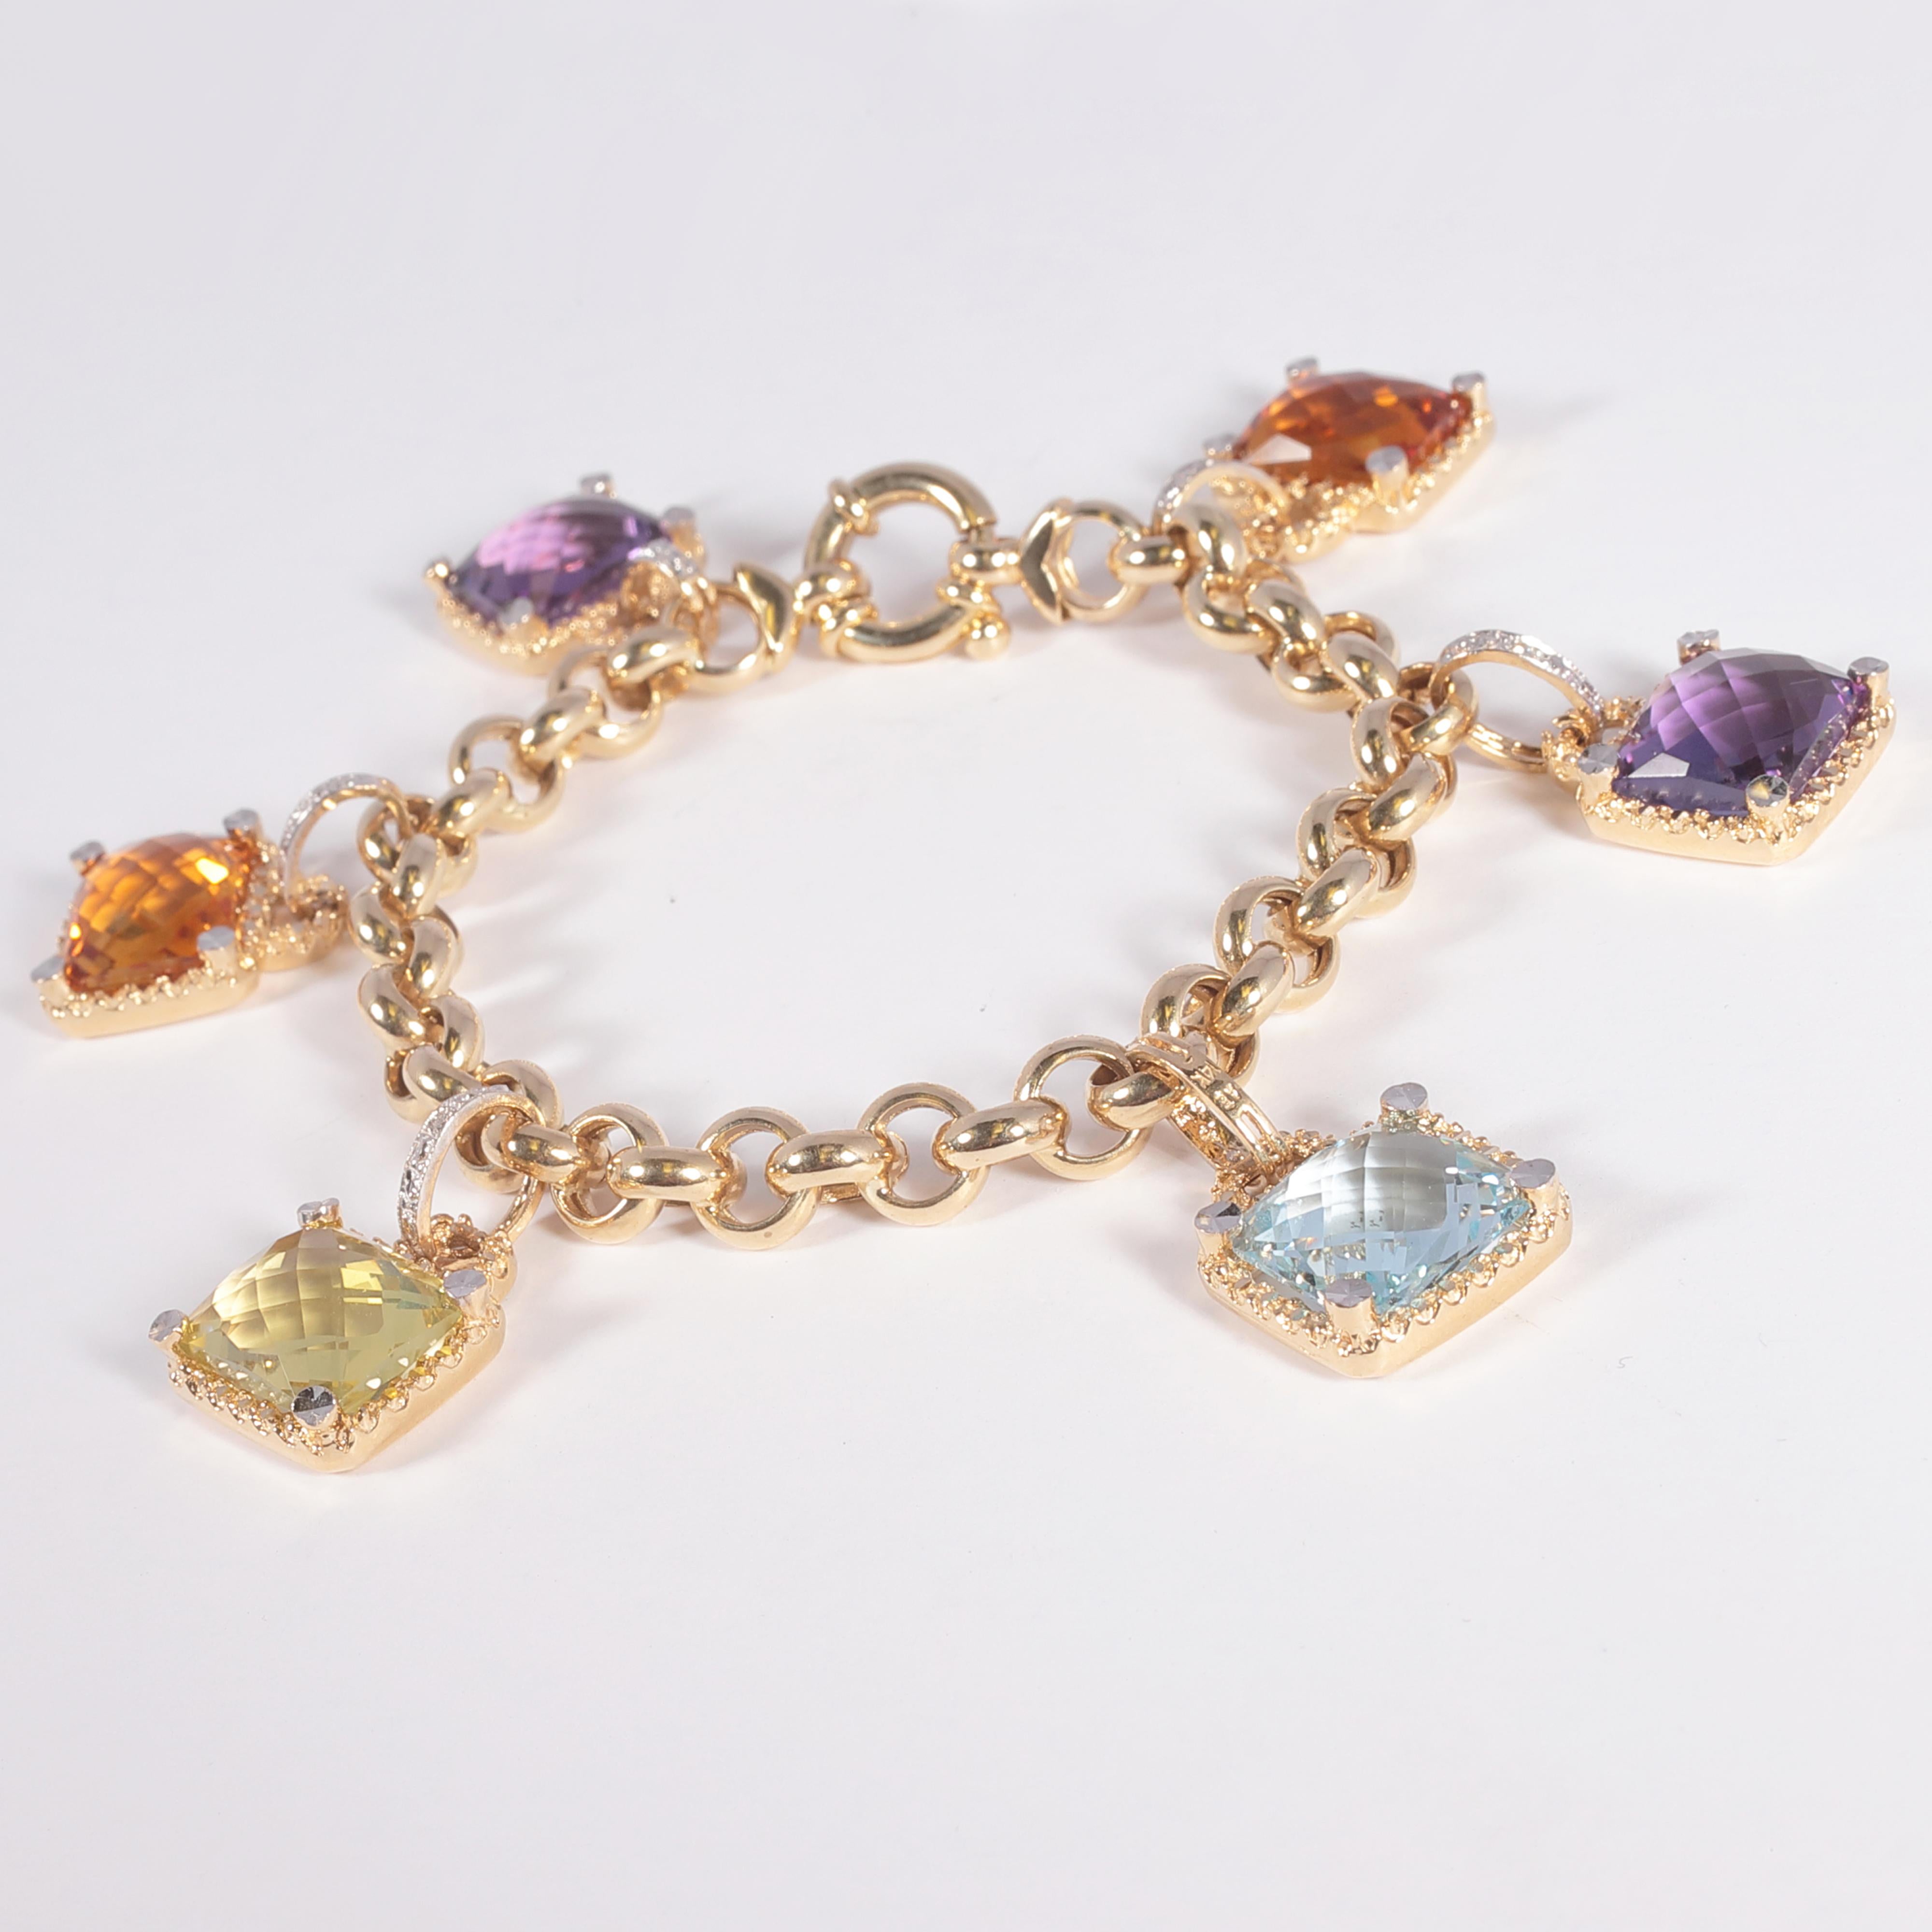 This bracelet features amethyst, blue topaz, citrine, and peridot charms with diamond accents.   The stones average 12.00 mm x 10.00 mm x 6.30 mm and have an estimated total weight of 33.50 carats. The bracelet is 7 1/4 inches long.